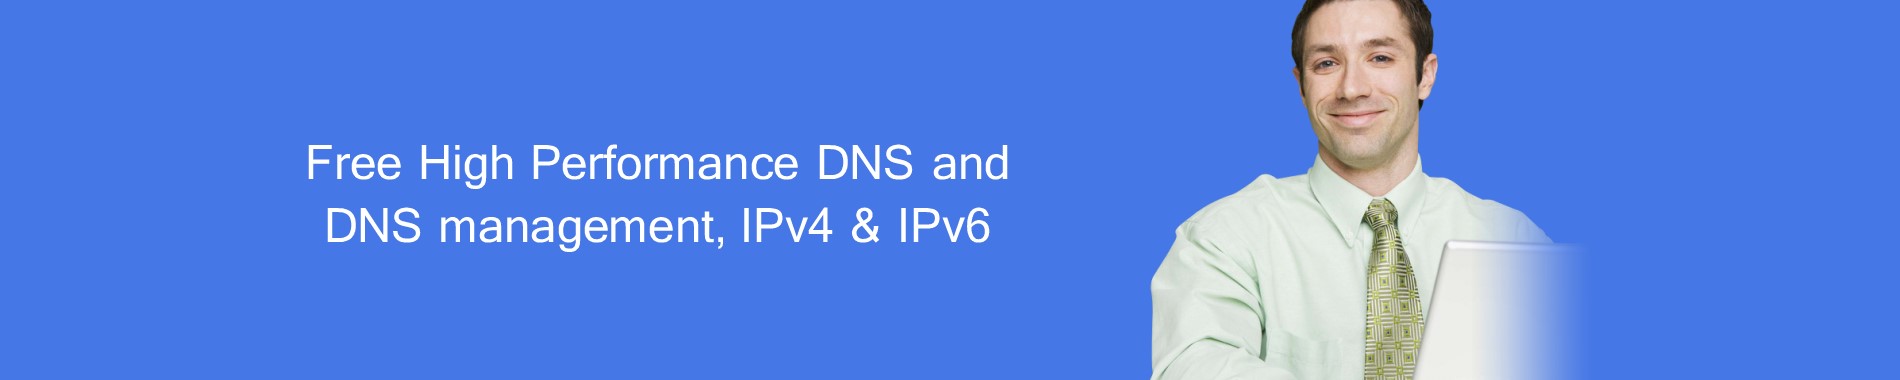 Datanoc Free DNS and DNS management